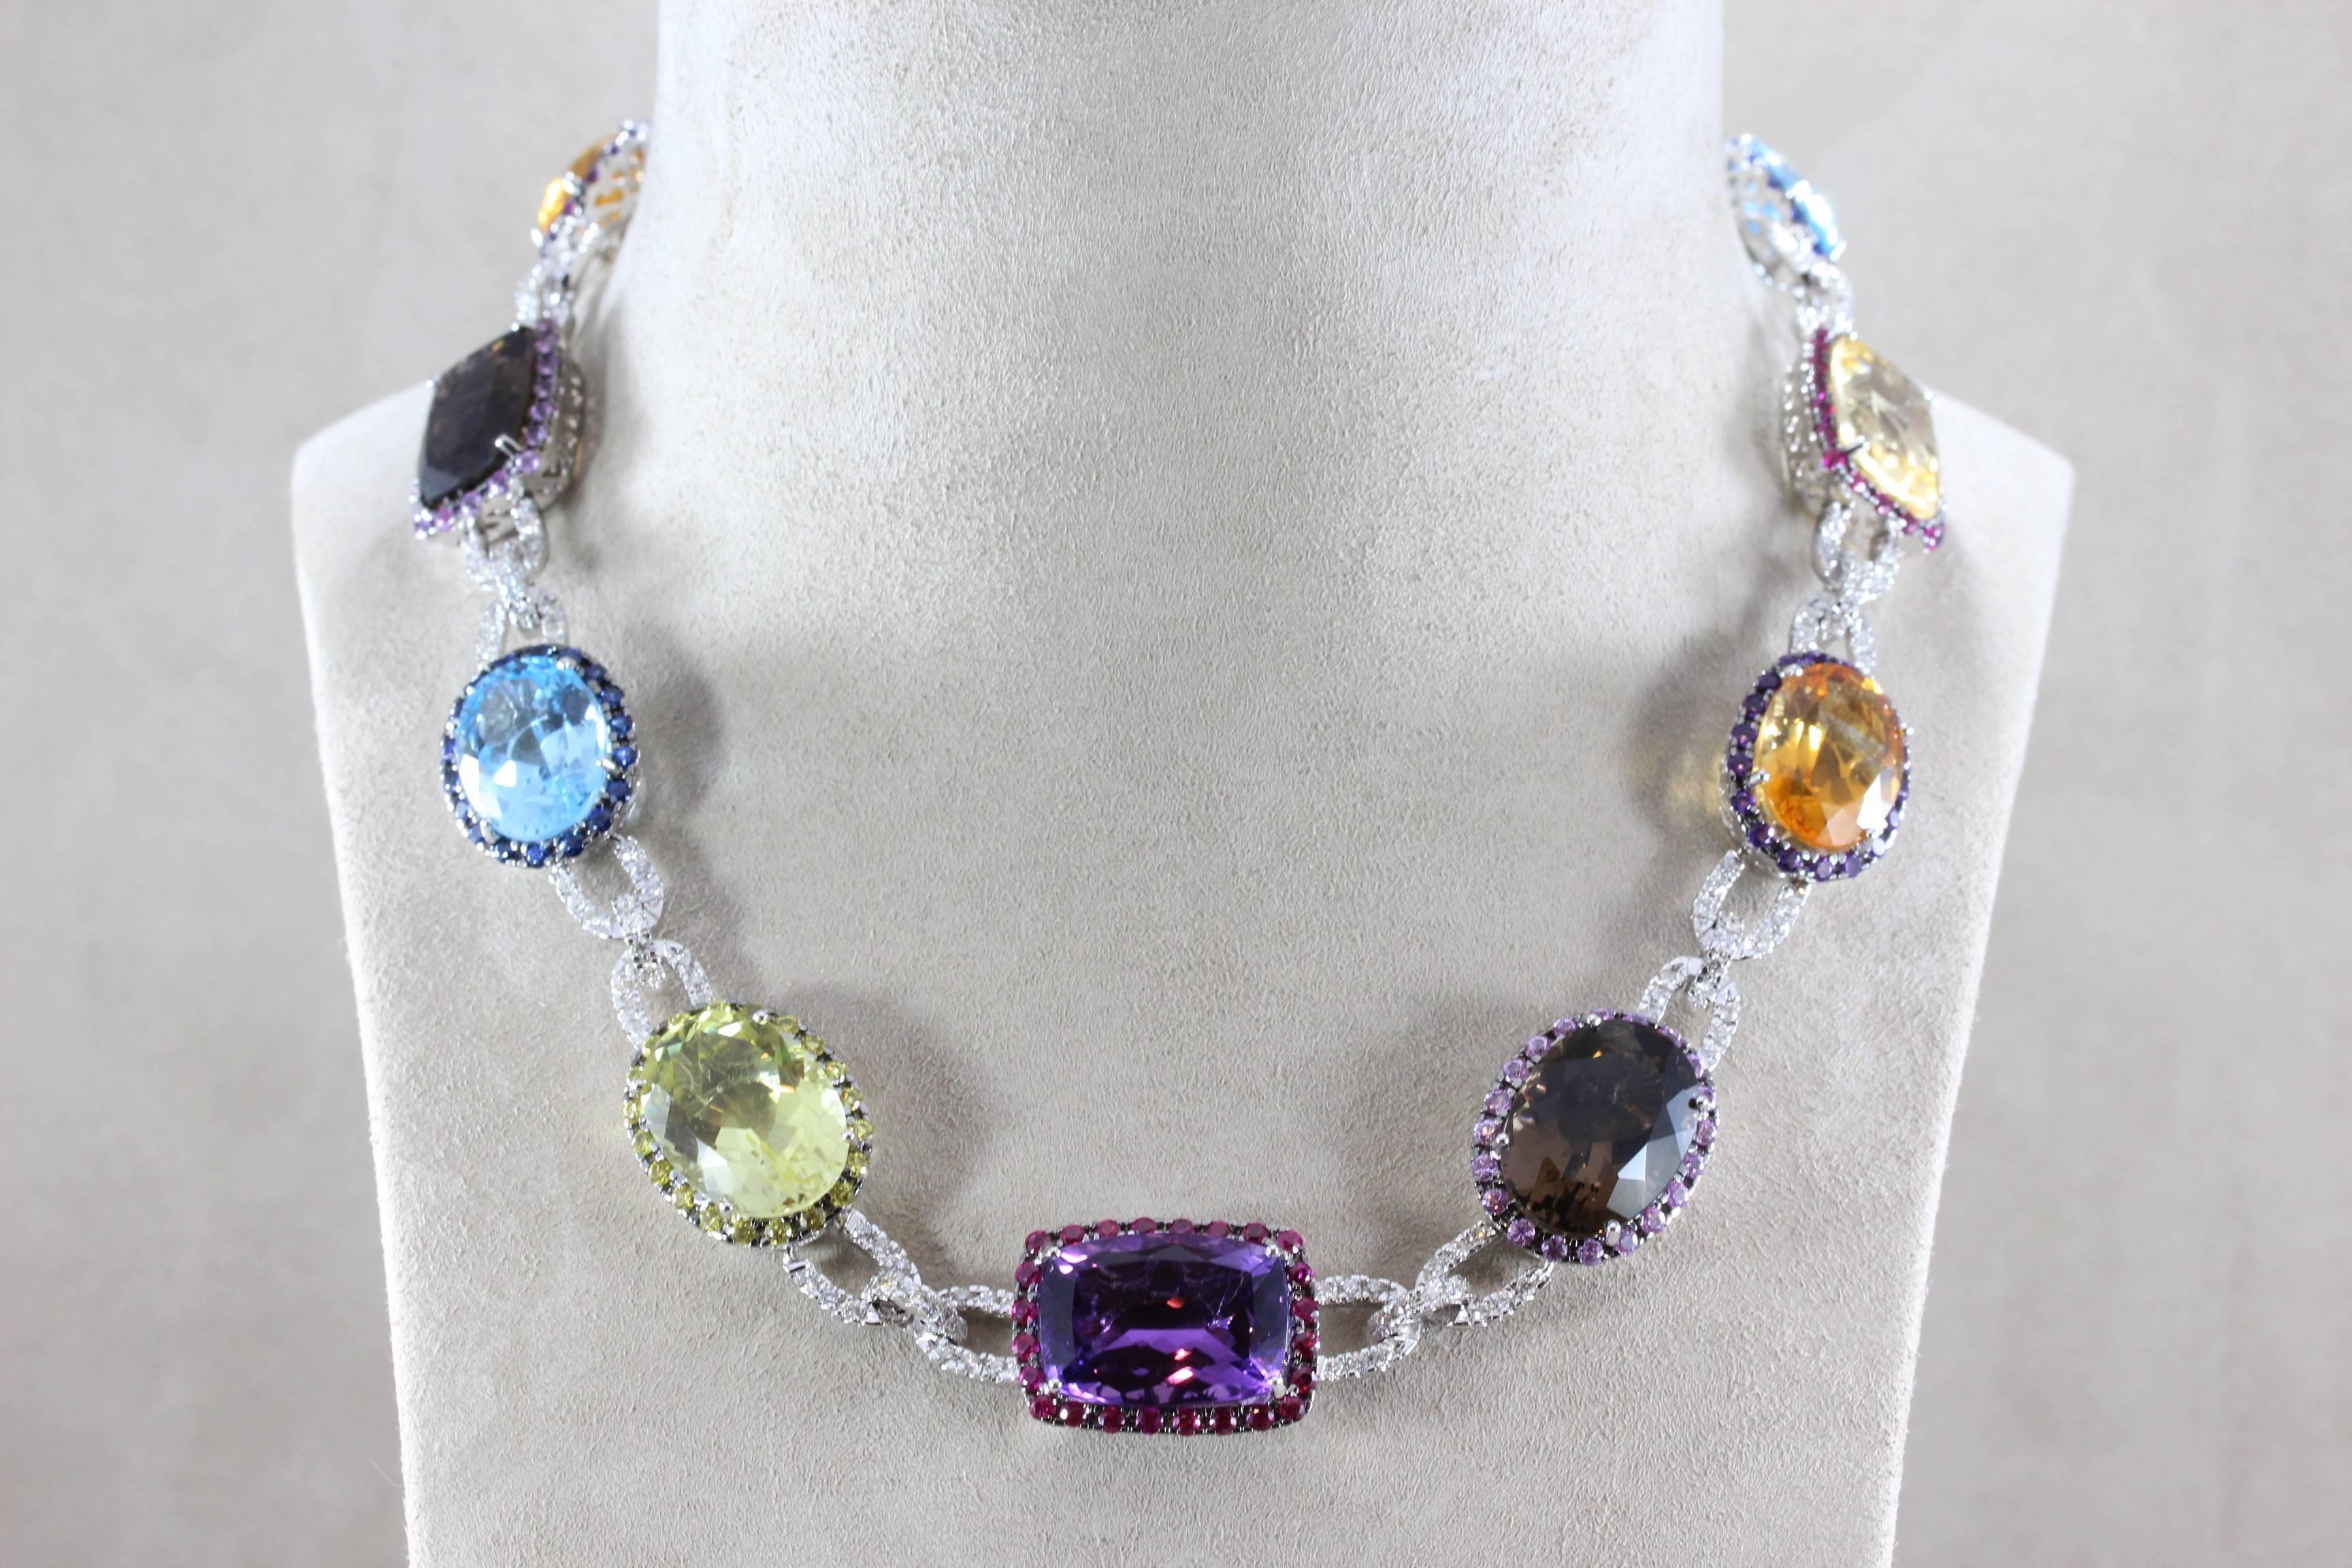 This magnificent necklace features over 100 carats of multi colored gemstones which include amethyst, topaz, citrine, ruby, sapphire and others with 3 carats of diamonds set in 18K white gold. A well crafted evening necklace full of color and